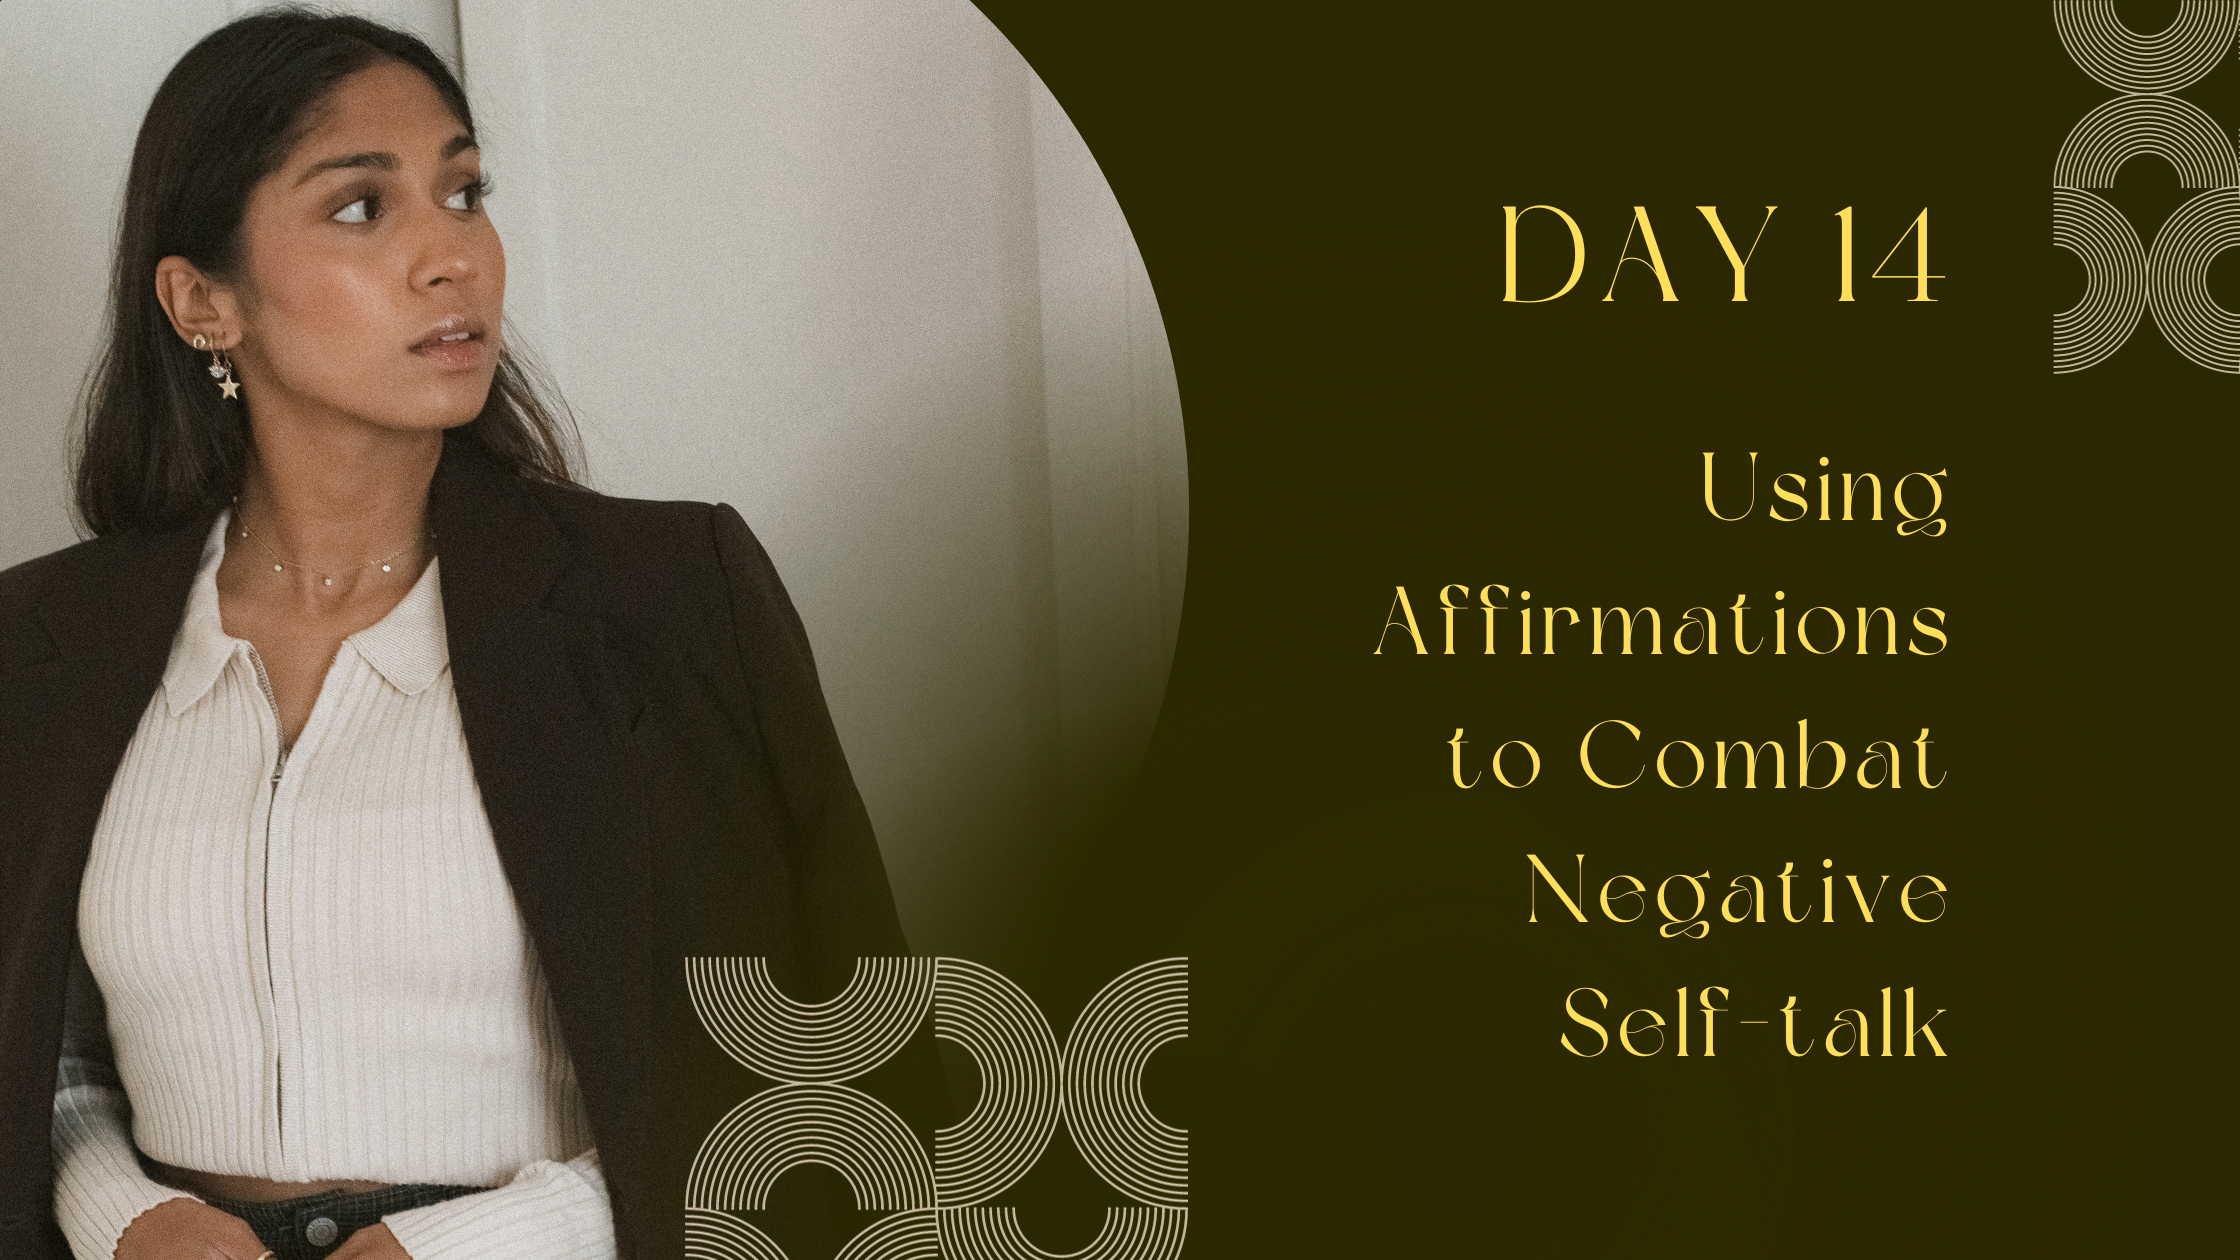 Day 14: Using Affirmations to Combat Negative Self-talk